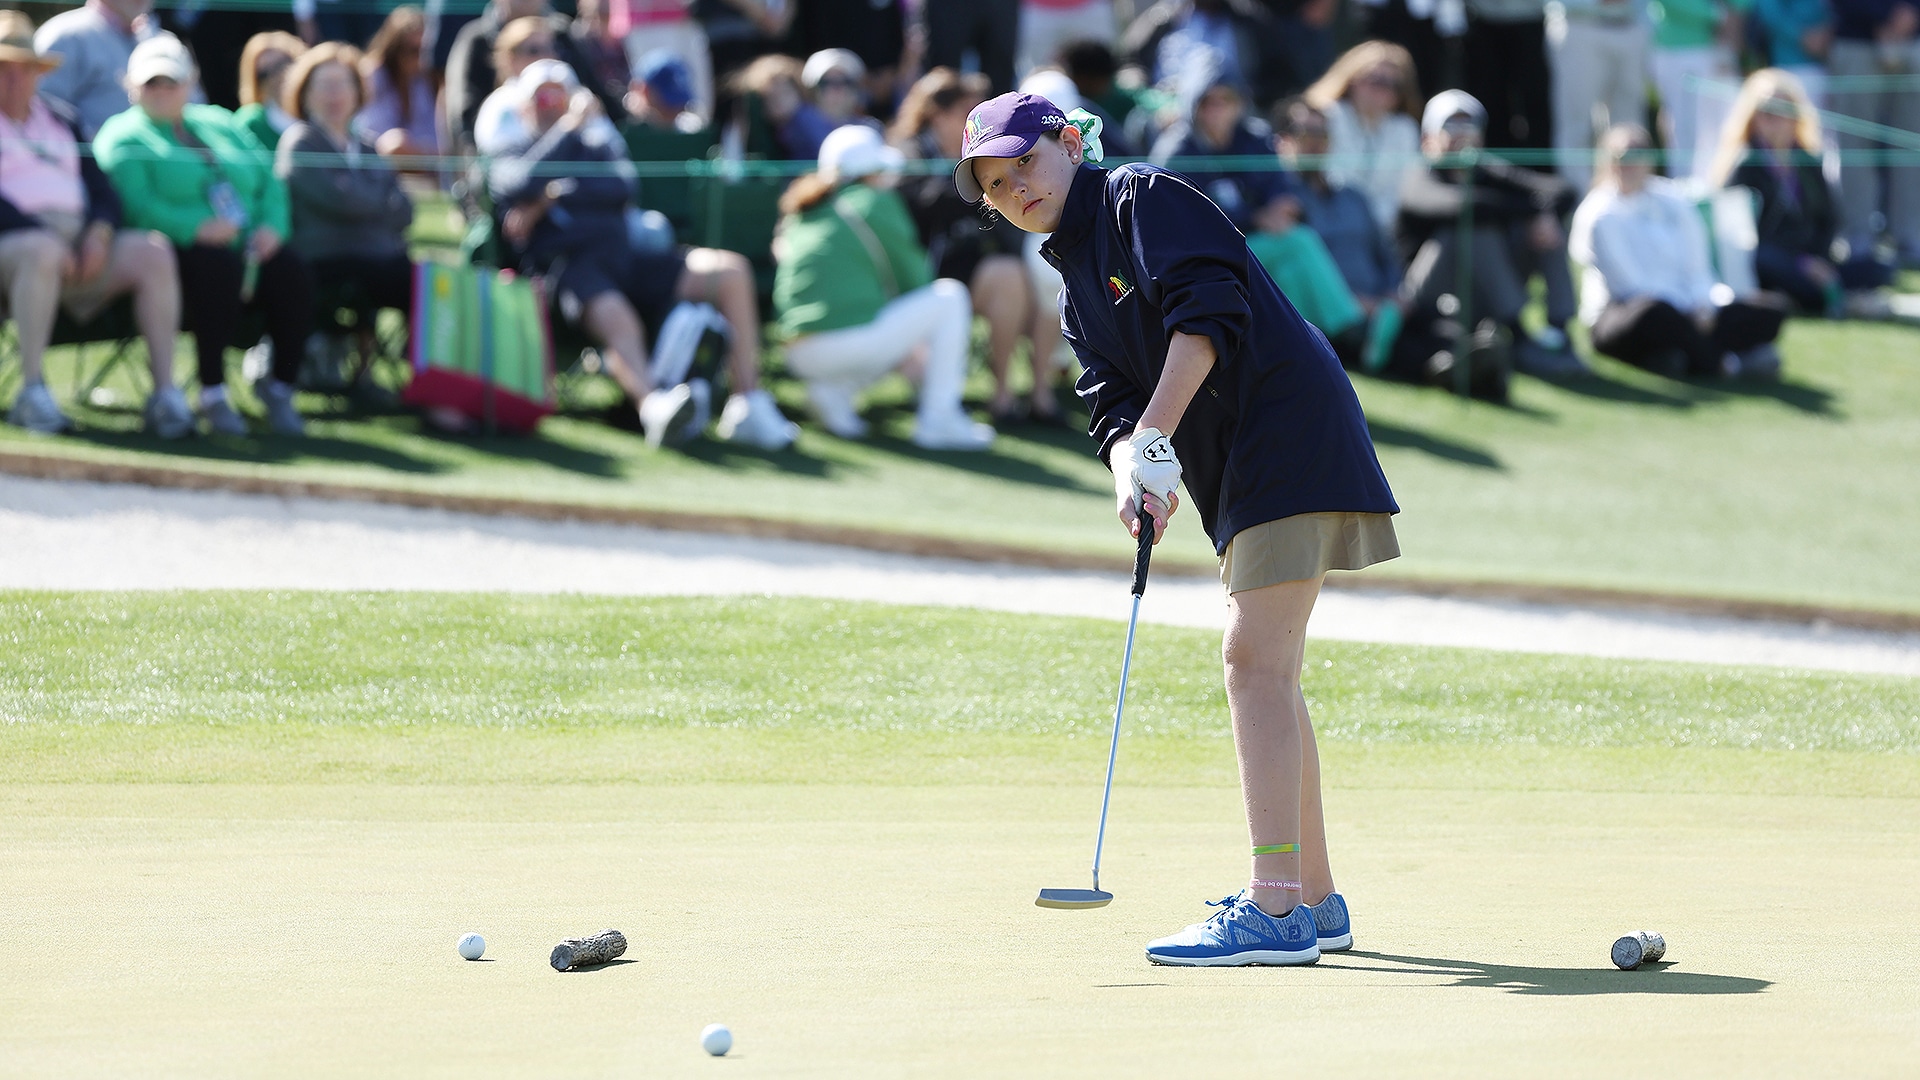 Field of 80 determined for 2023 Drive, Chip and Putt National Finals at Augusta National